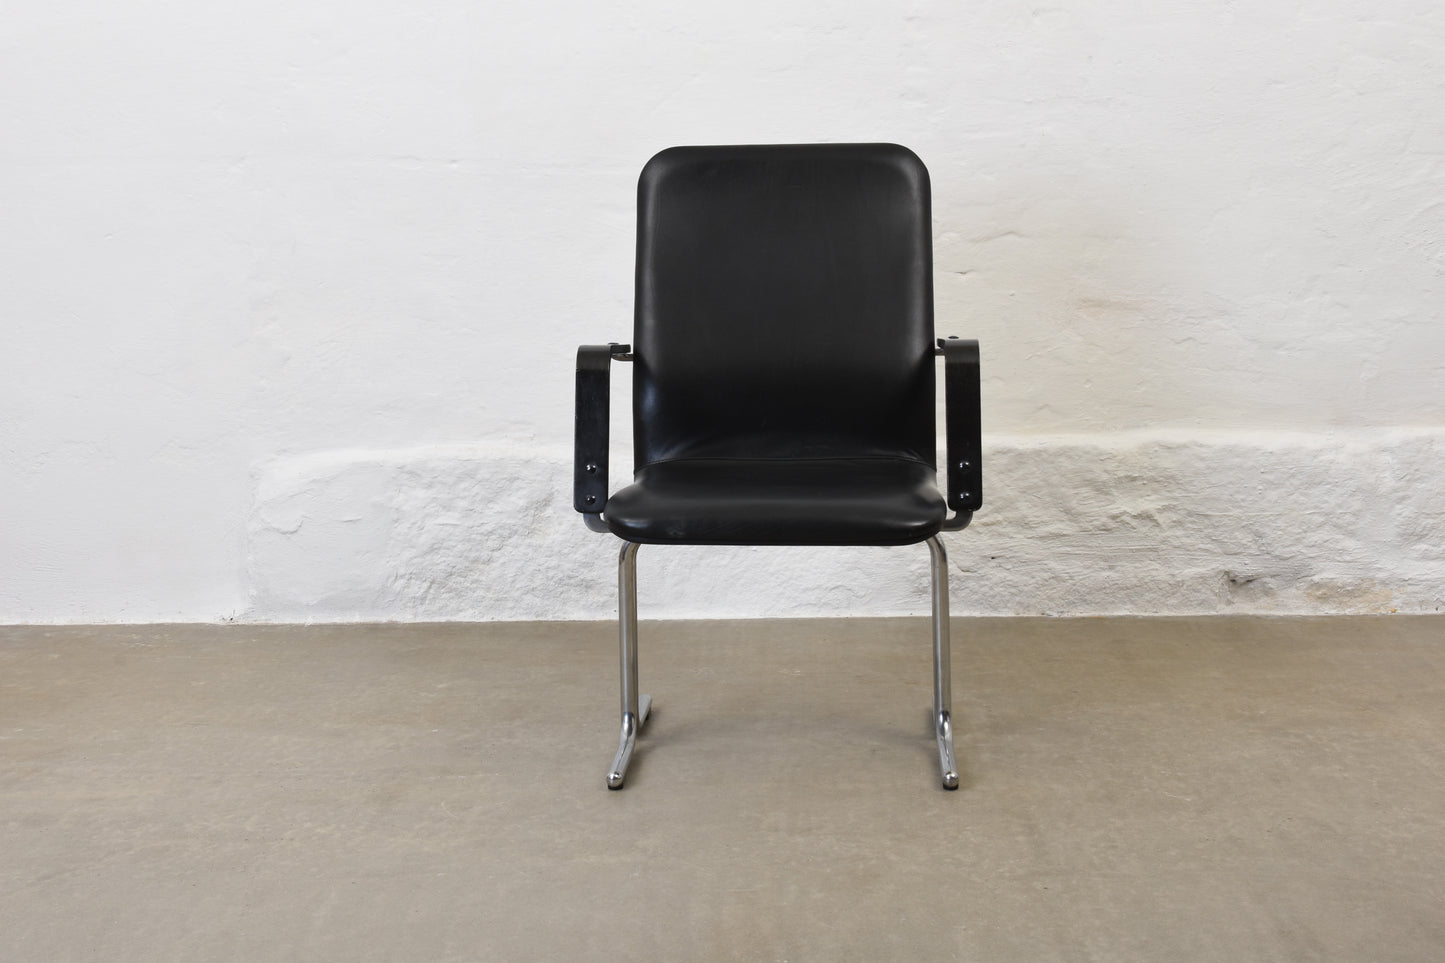 Two available: 1980s leather armchairs by Yrjö Kukkapuro